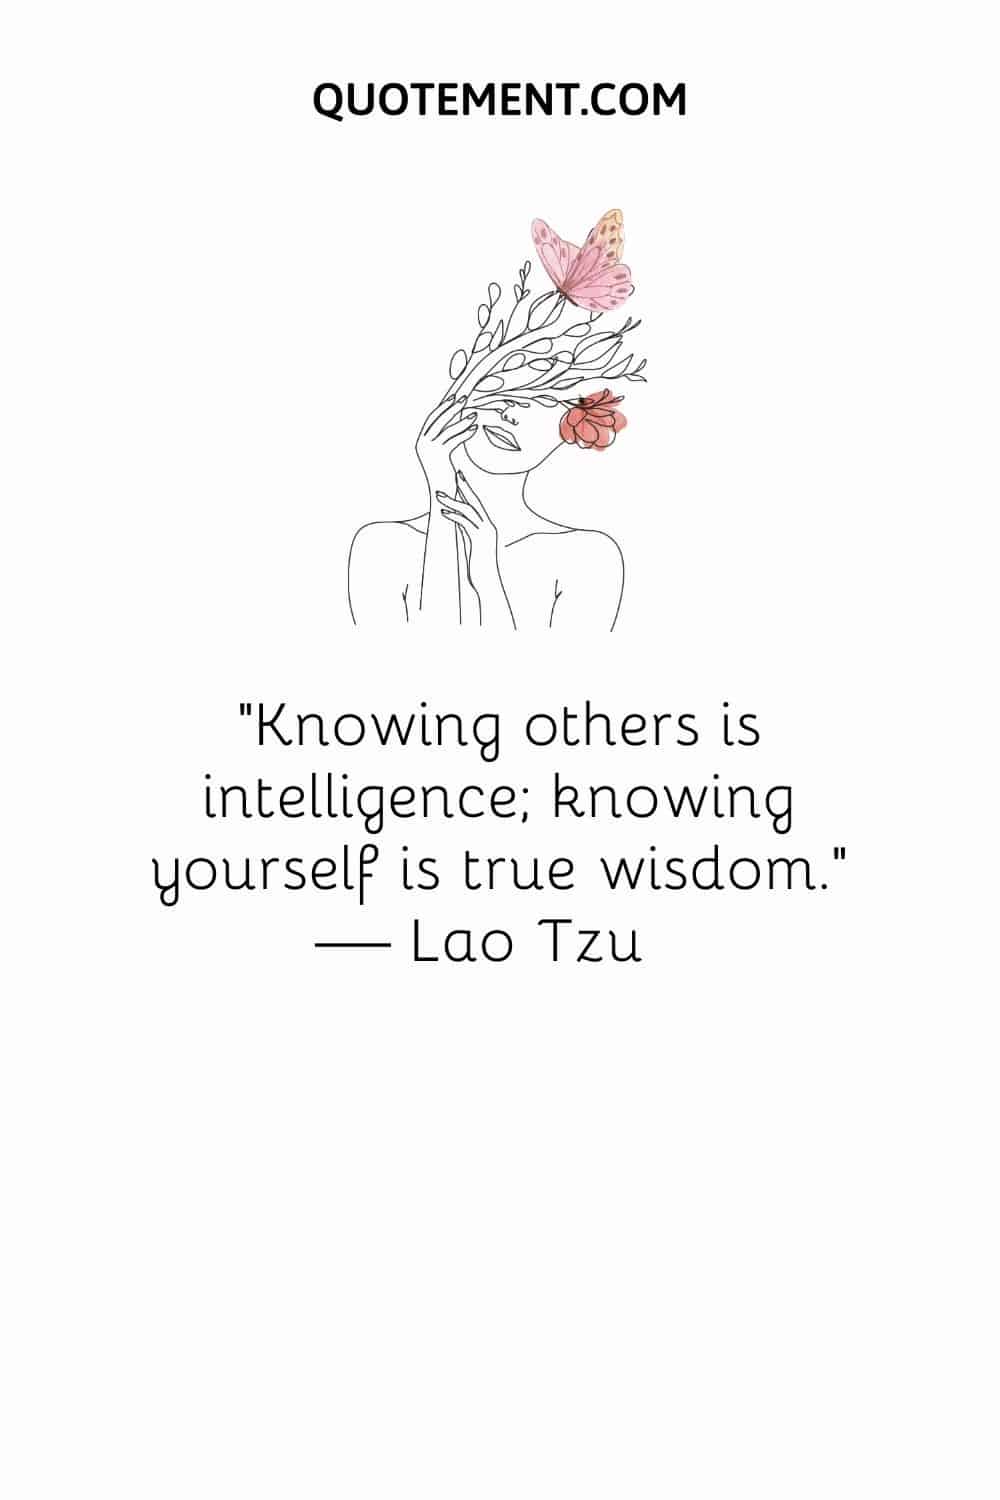 flowers and butterflies on a woman's head illustration representing life quote about knowing yourself